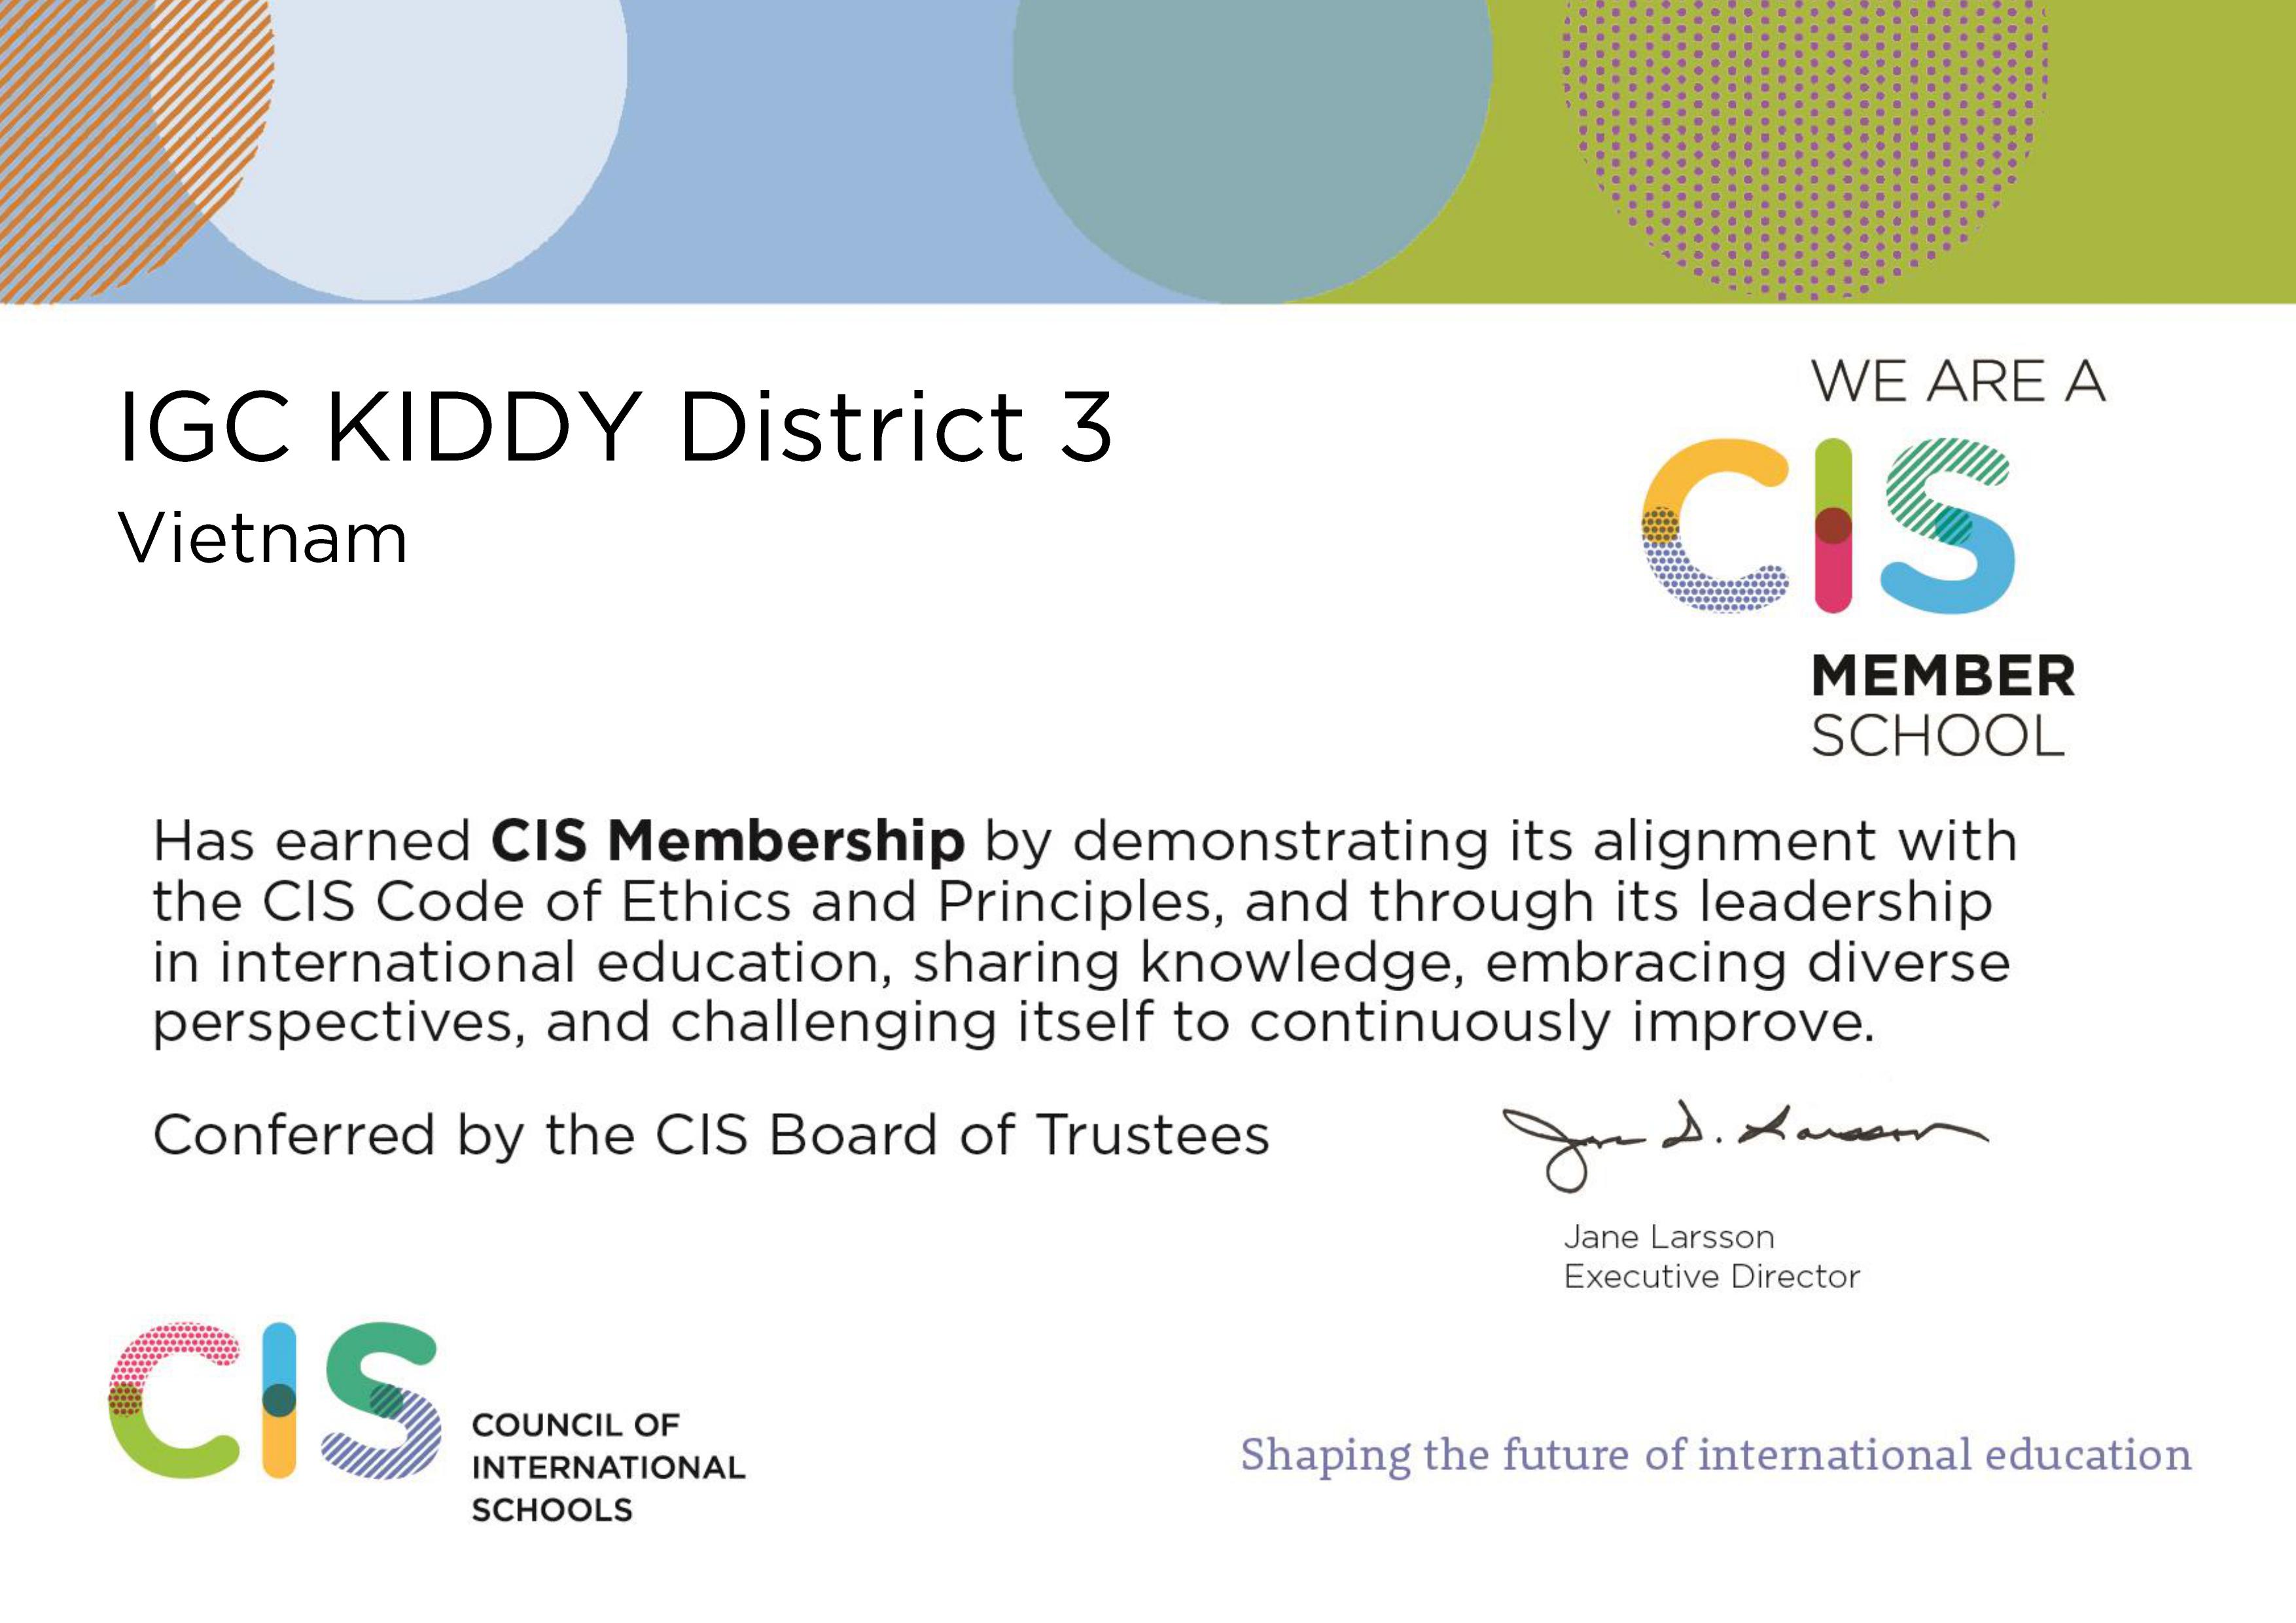 Member of the Council of International Schools (CIS)